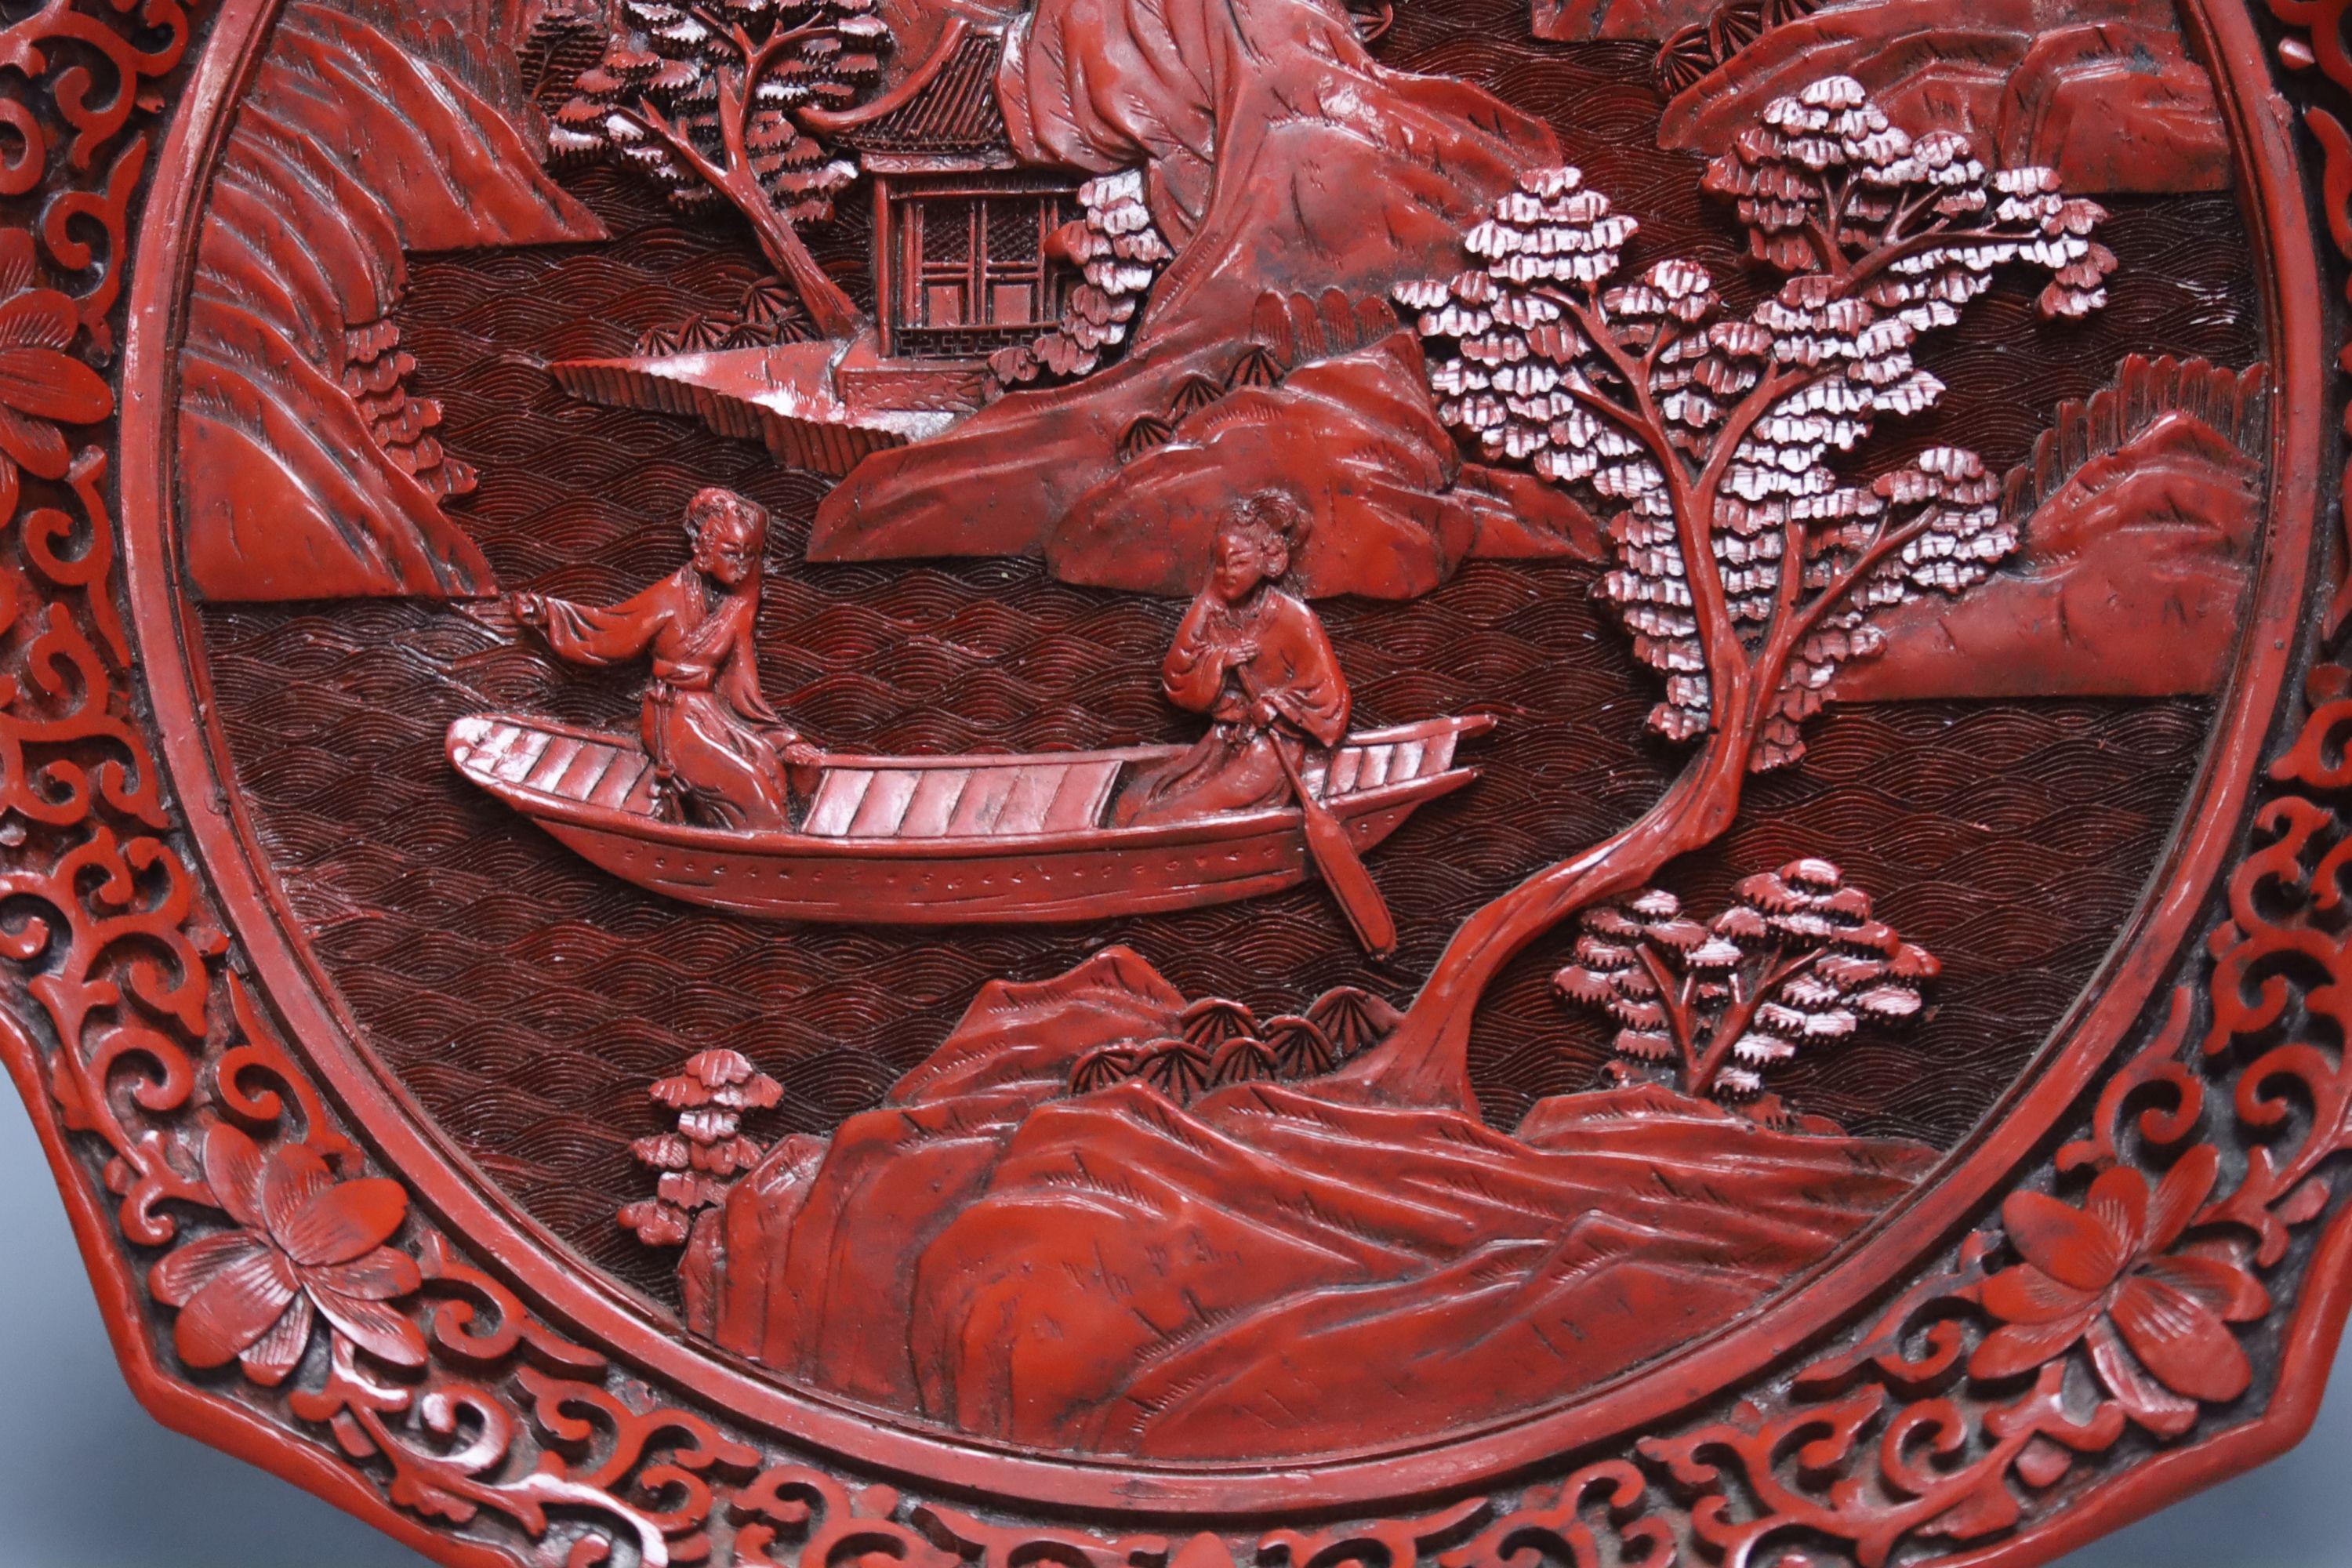 A Chinese composition and lacquer dish, 25cm